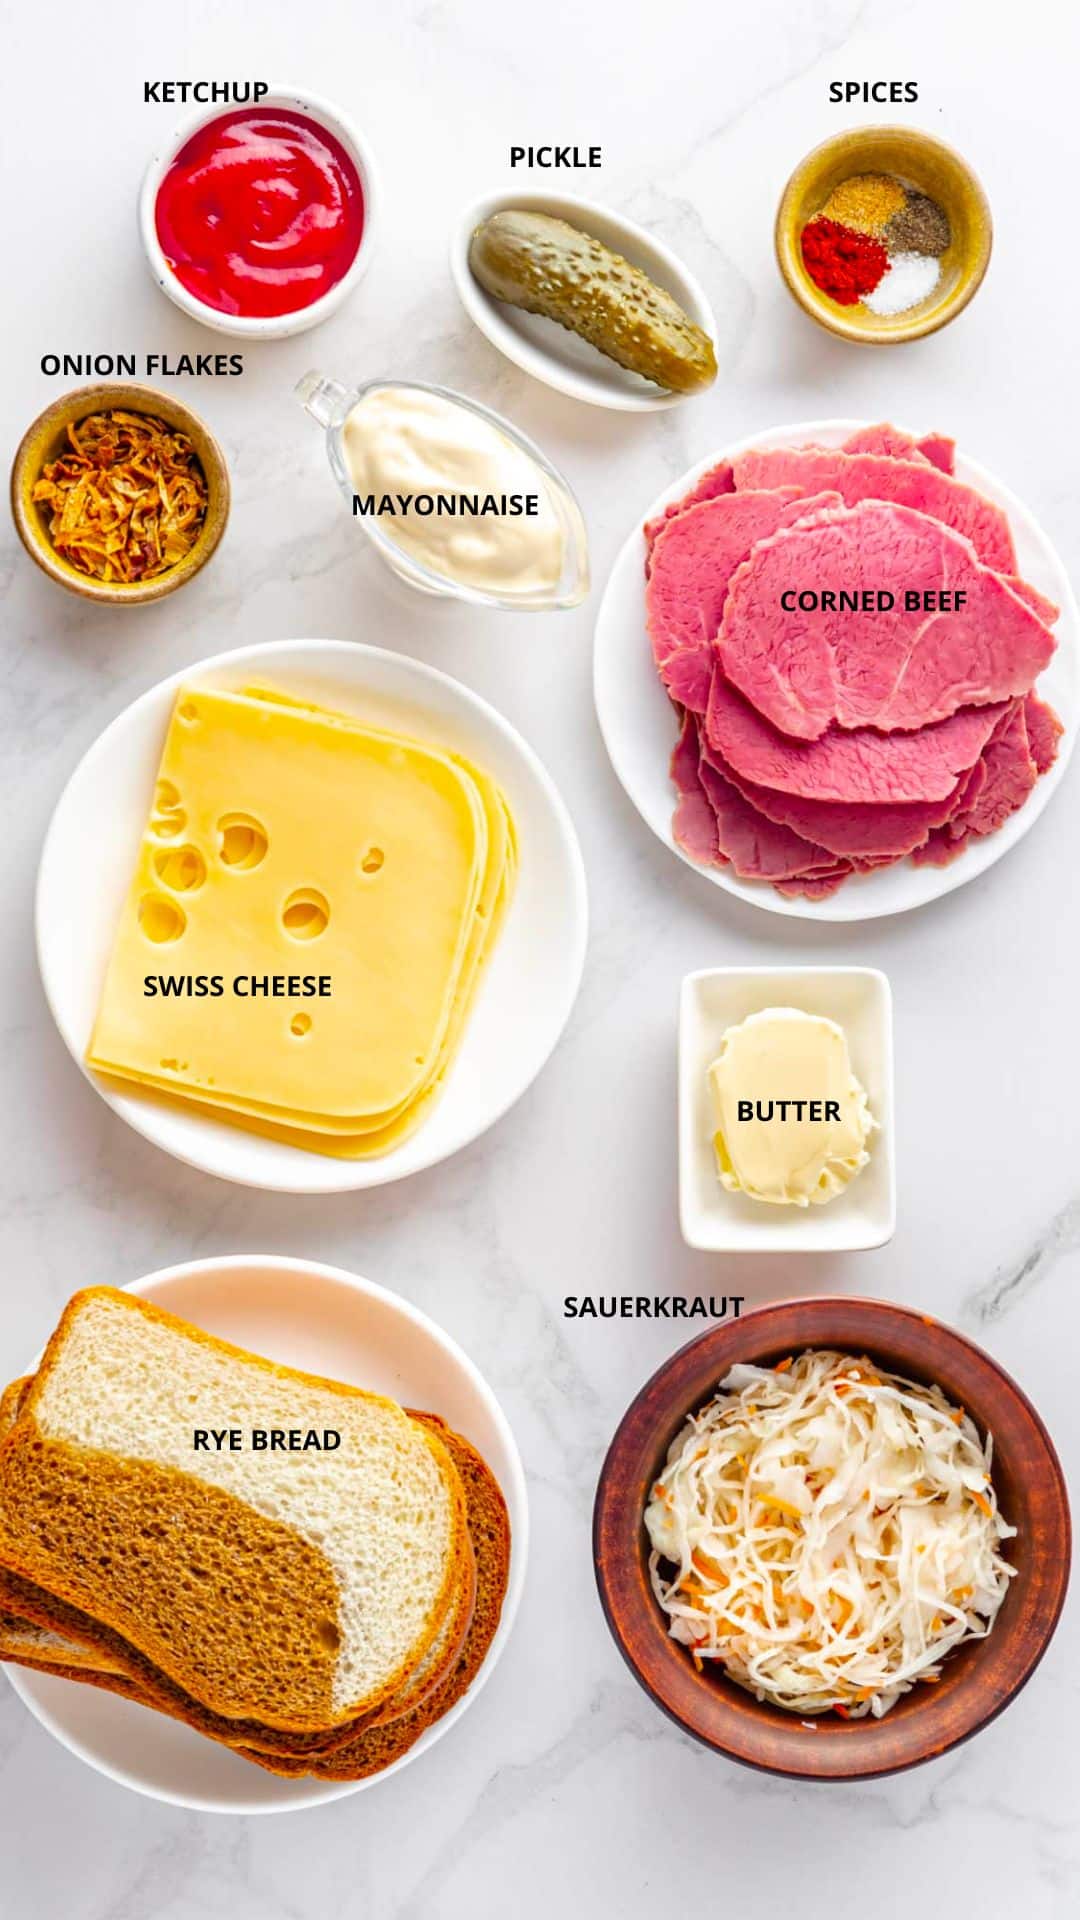 reuben sandwich ingredients ketchup, pickle, spices, onion flakes, mayonnaise, corned beef, butter, sauerkraut, swiss cheese, and rye bread.